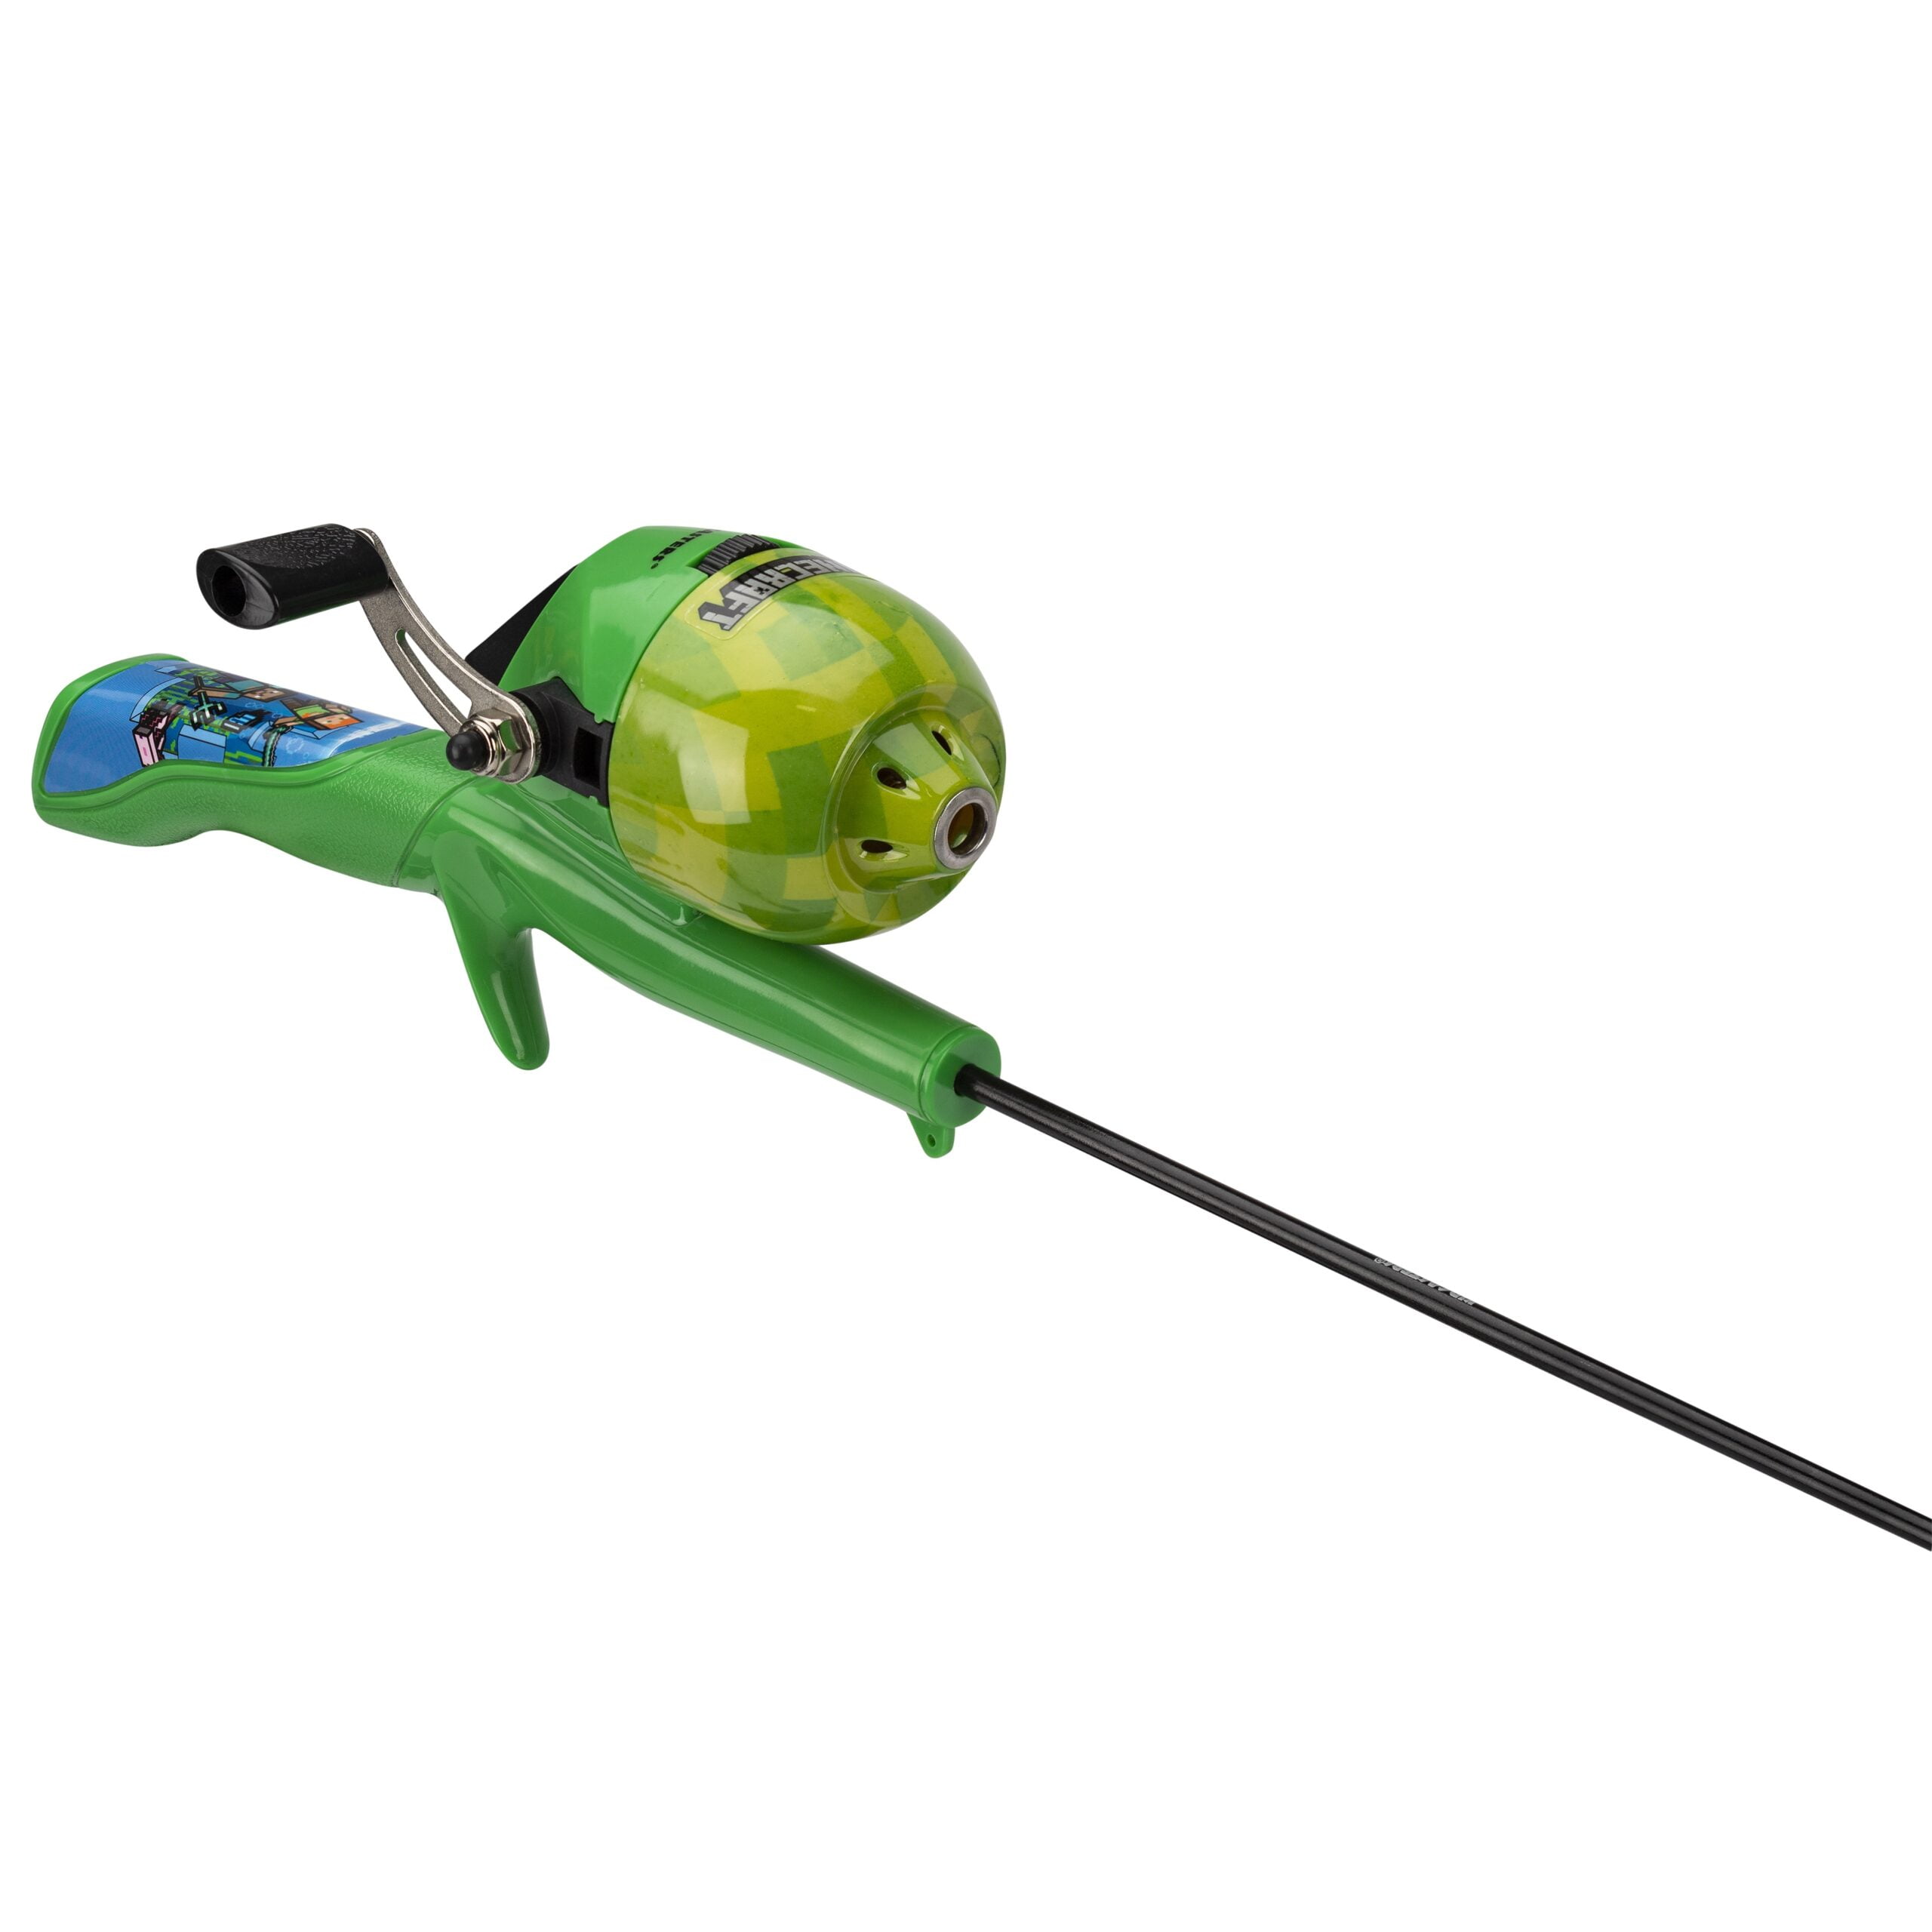 Kid Casters  Youth Fishing Gear Supplier